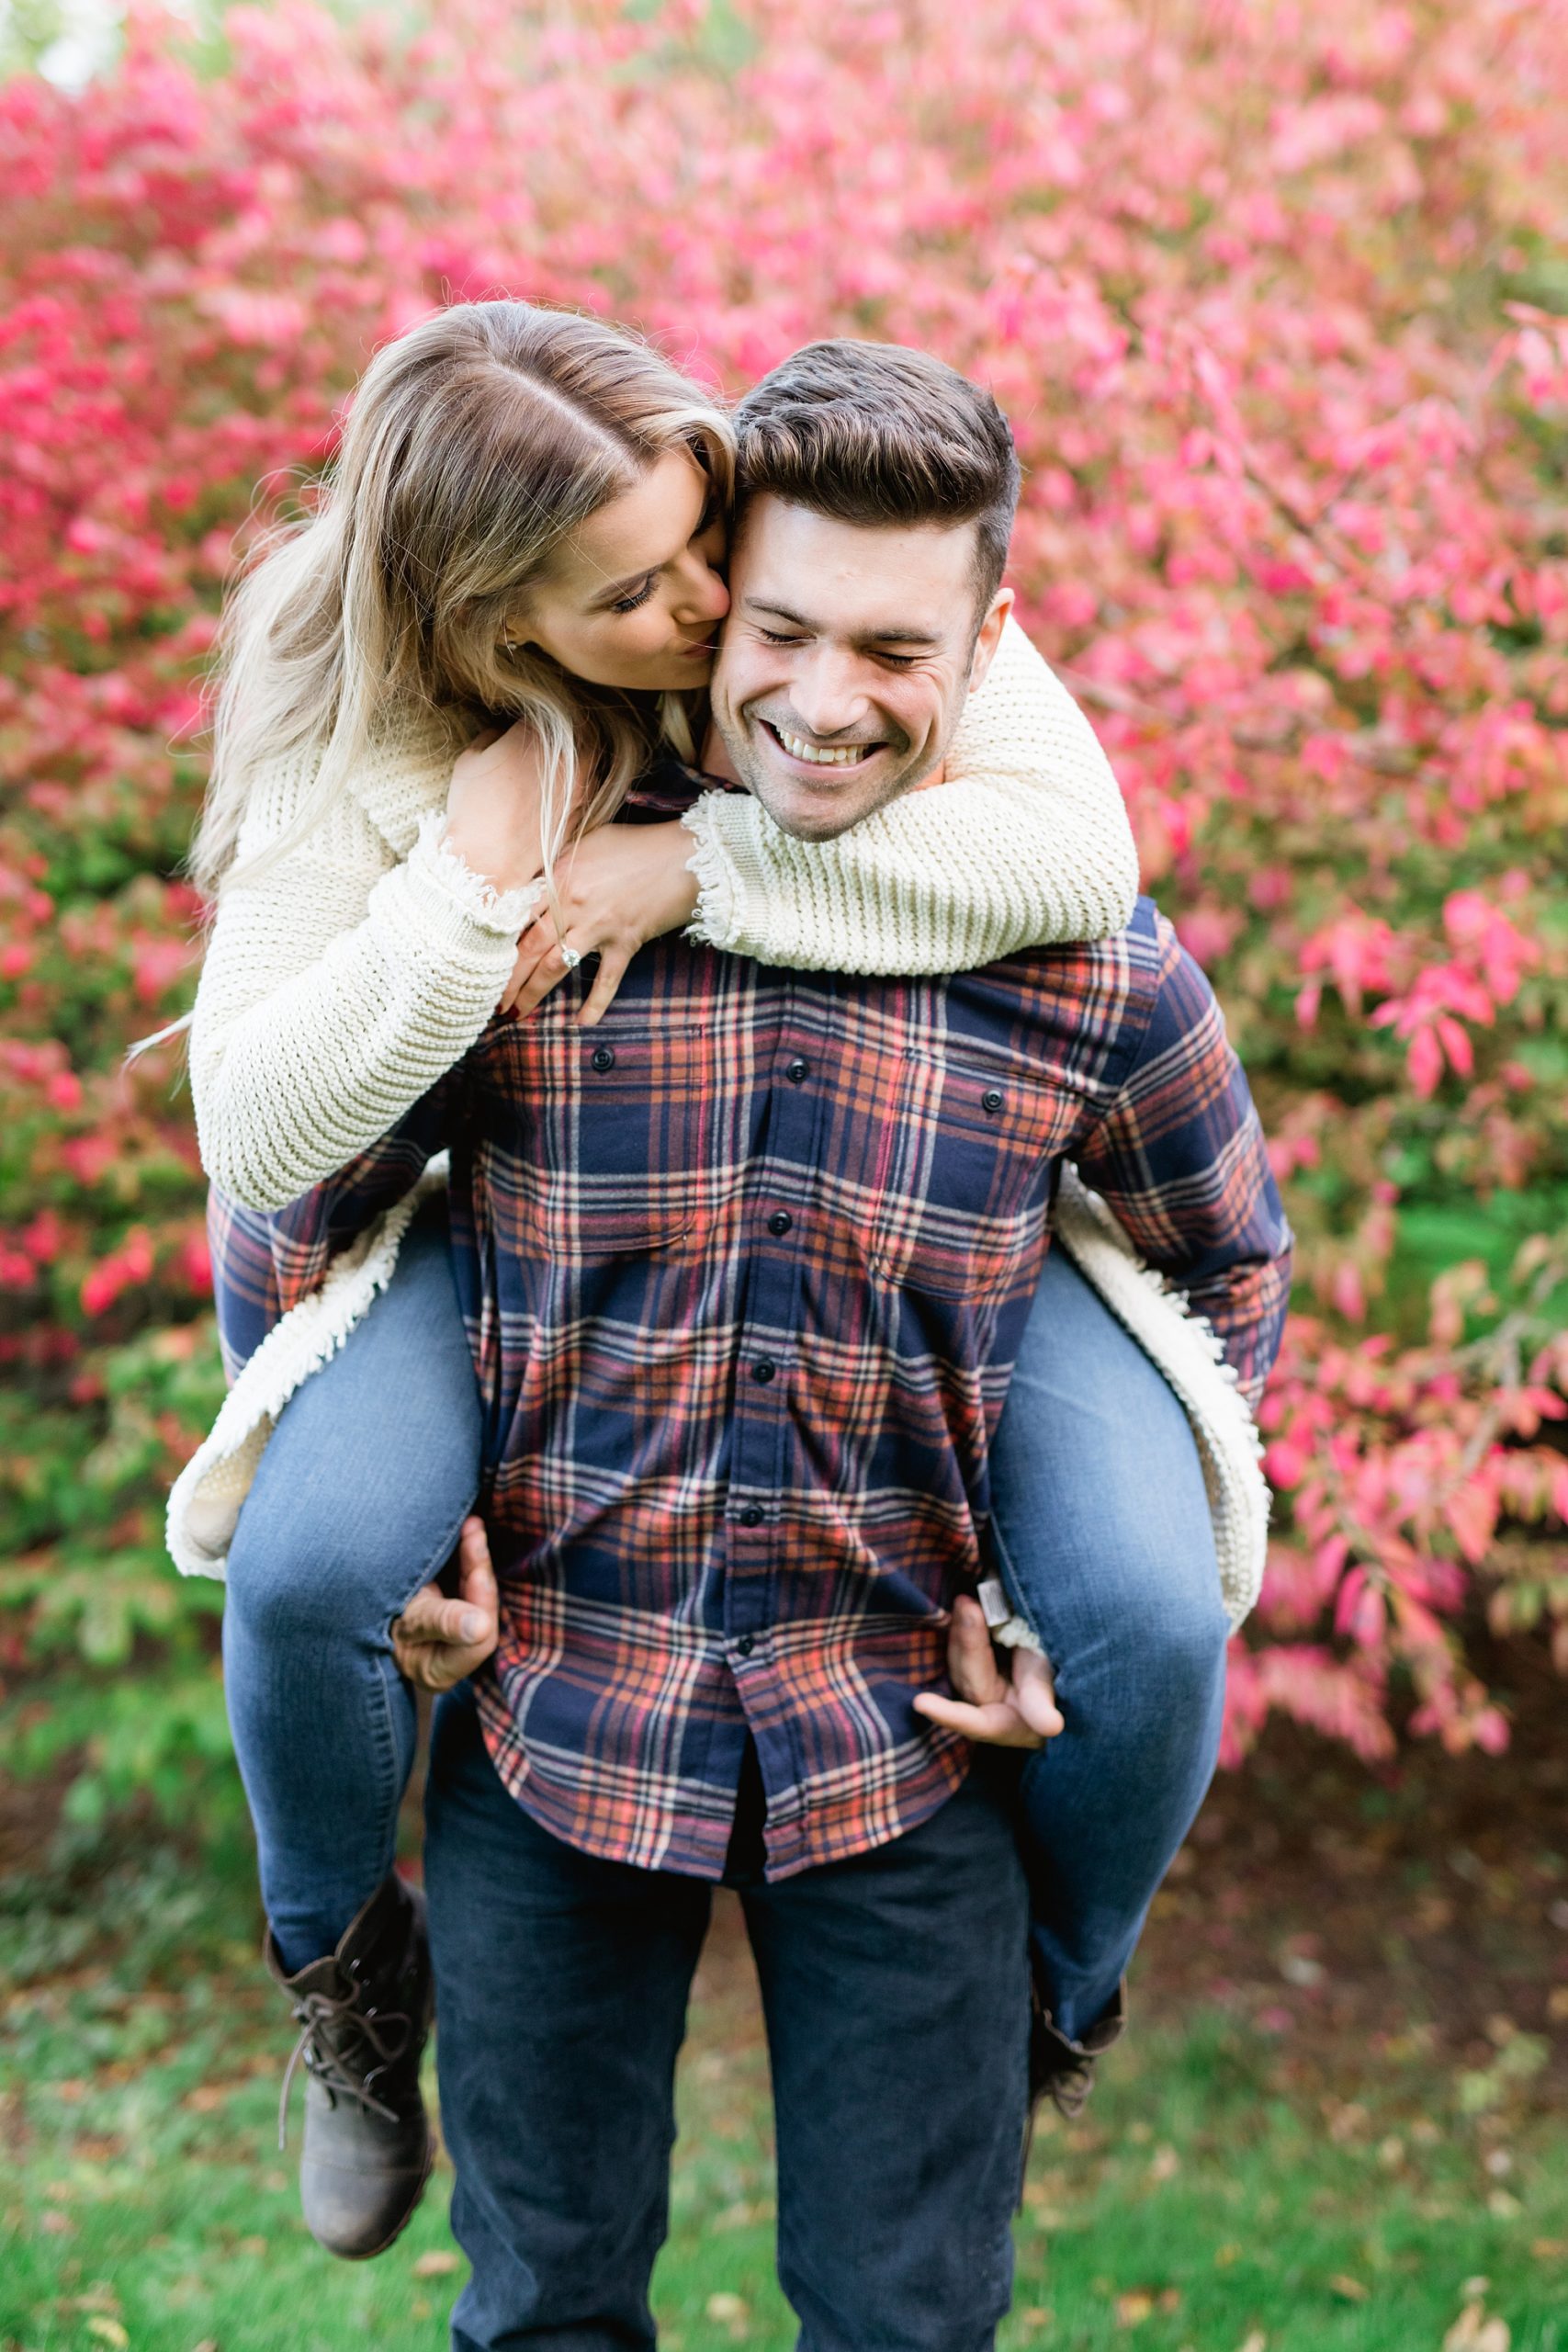 Fall Engagement Photos | Breanne Rochelle Photography